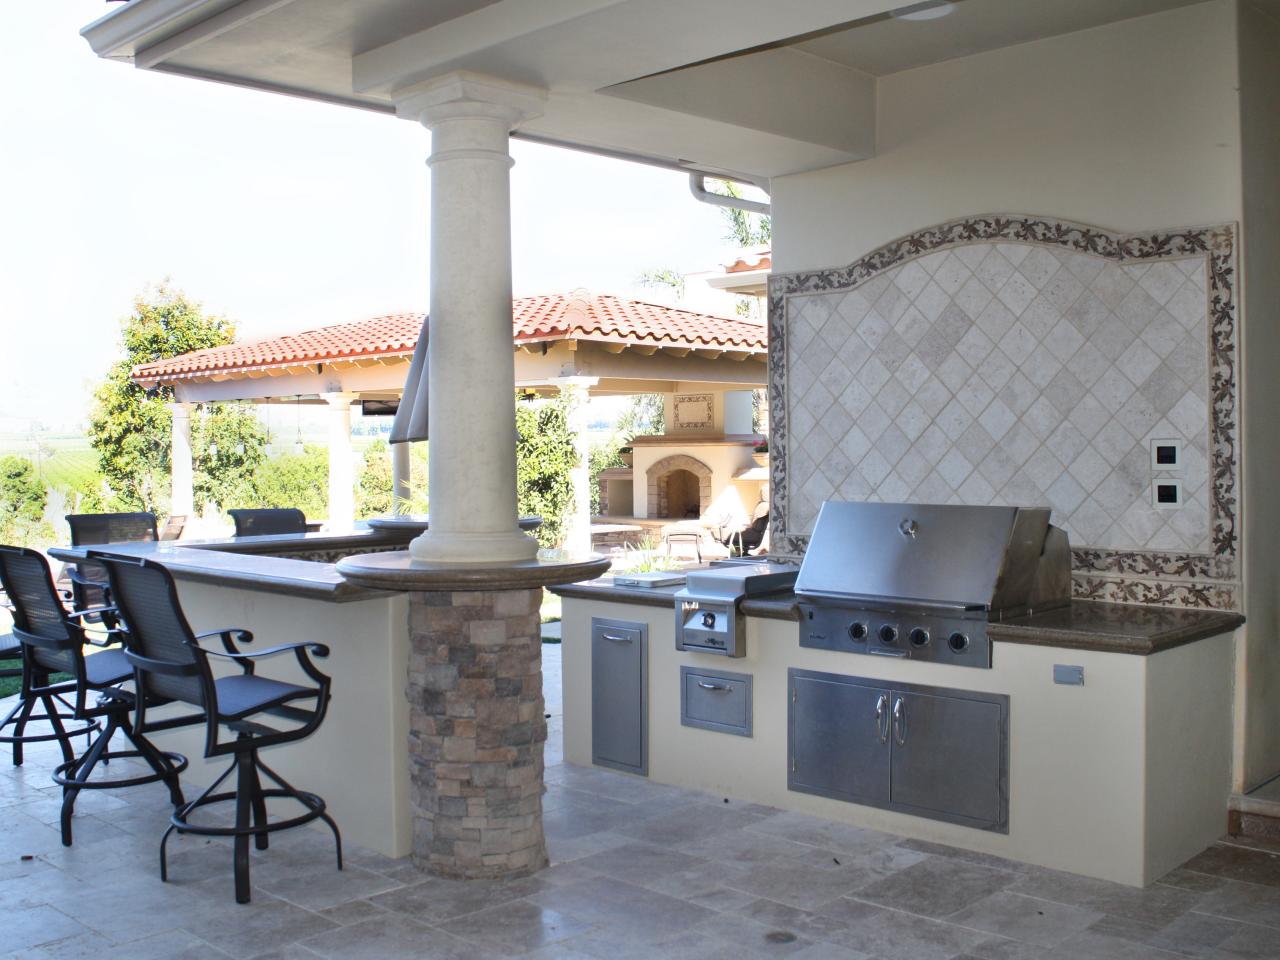 Outdoor Kitchen Cabinet Ideas: Pictures, Tips & Expert Advice | HGTV